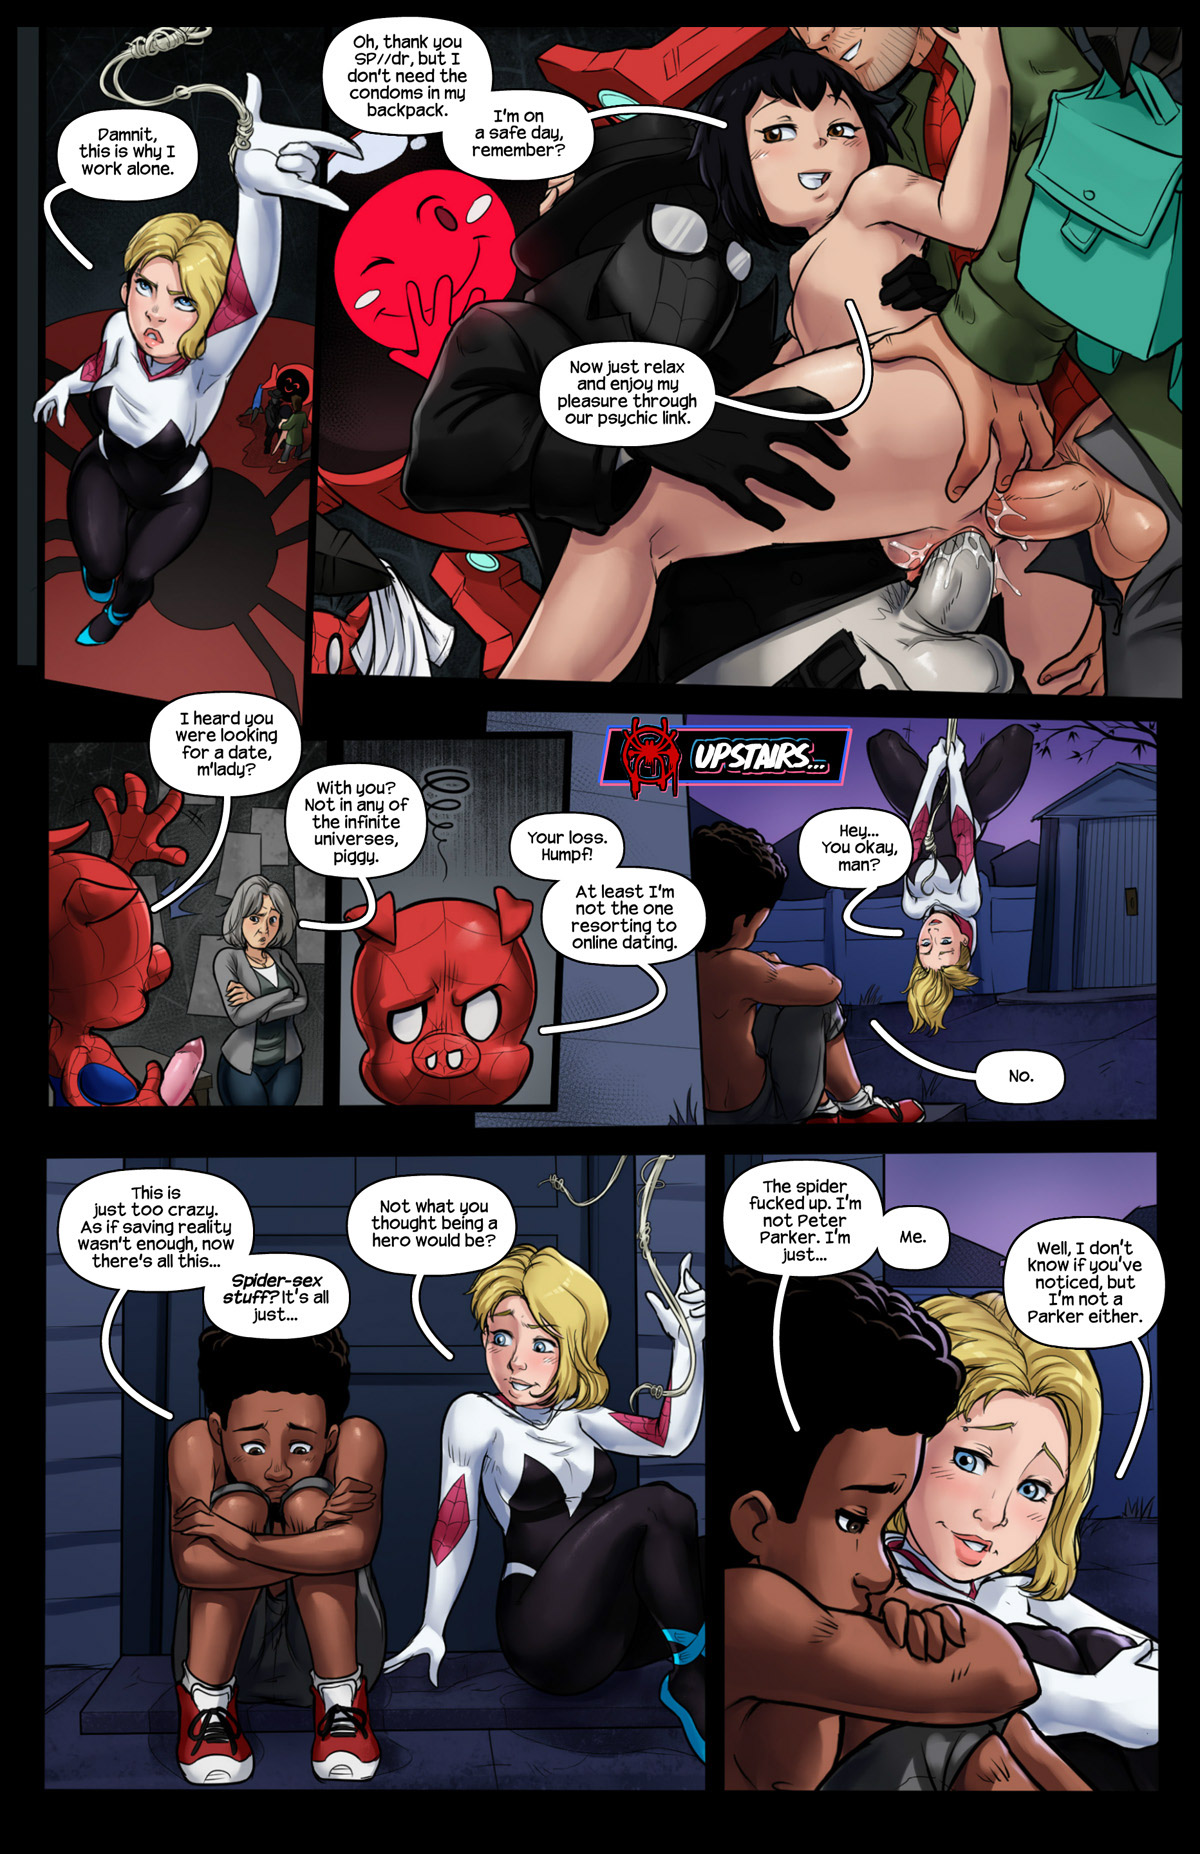 Tracy Scops - Spider-Sex Into The Spider-Smut " Porn Comics Galleries.